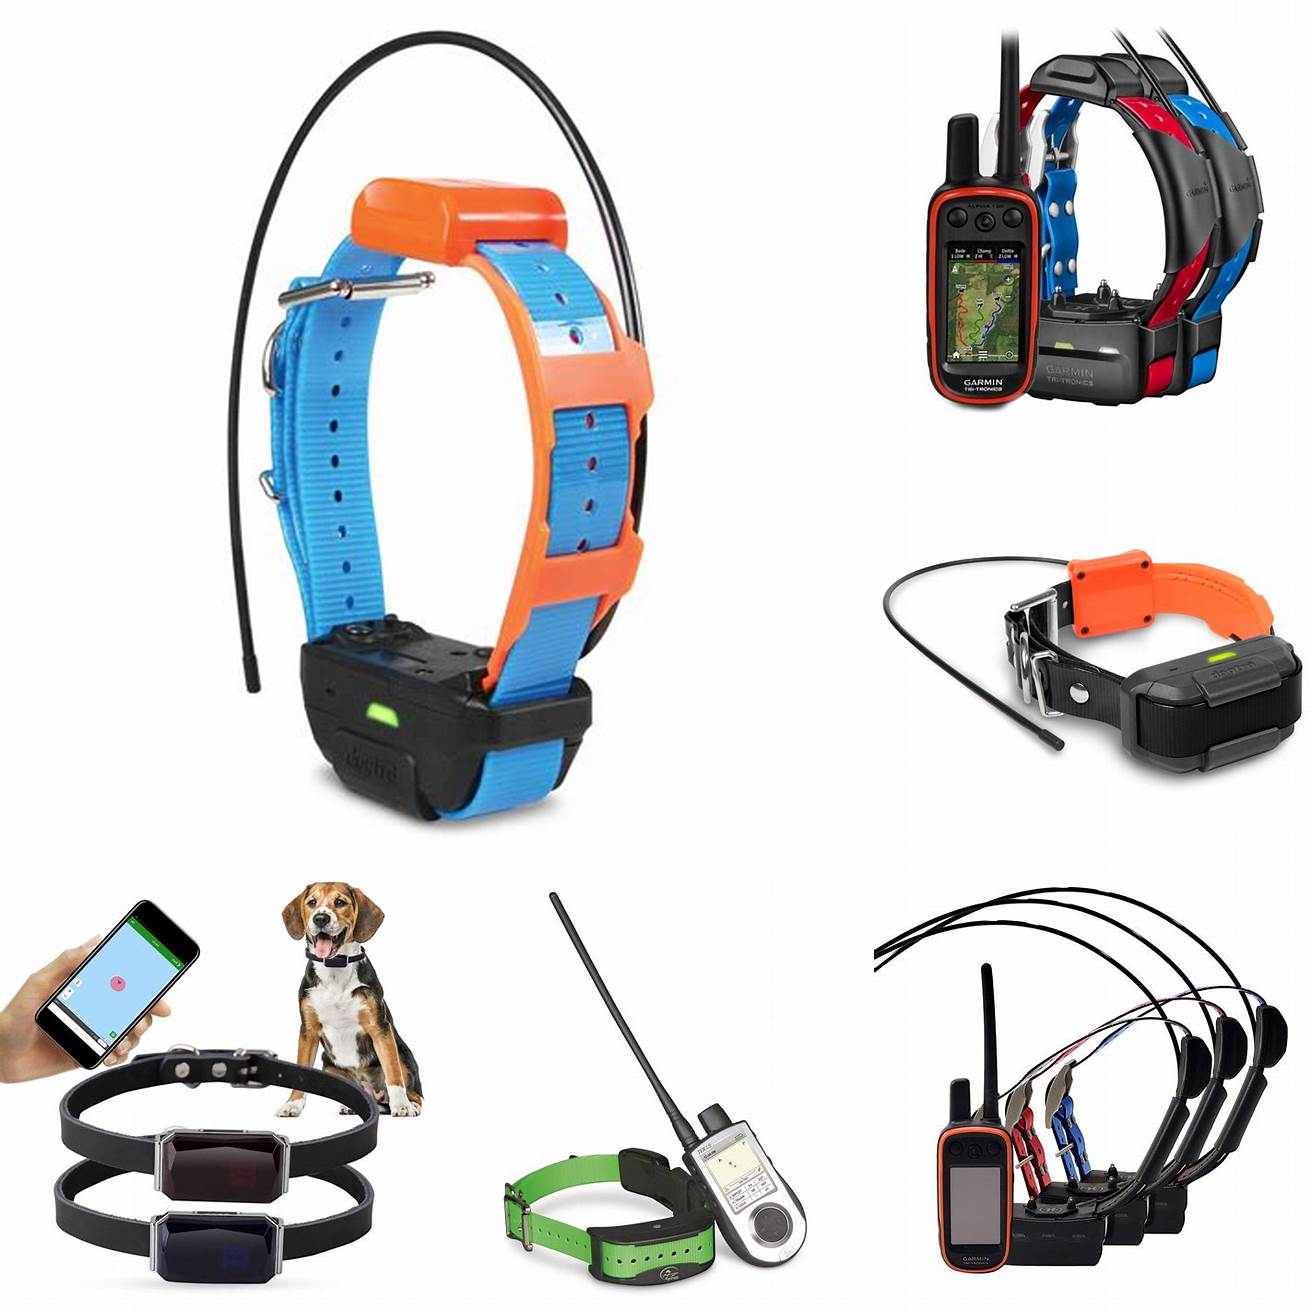 5 Customization Many GPS collars allow you to customize settings such as safe zones alert notifications and activity goals